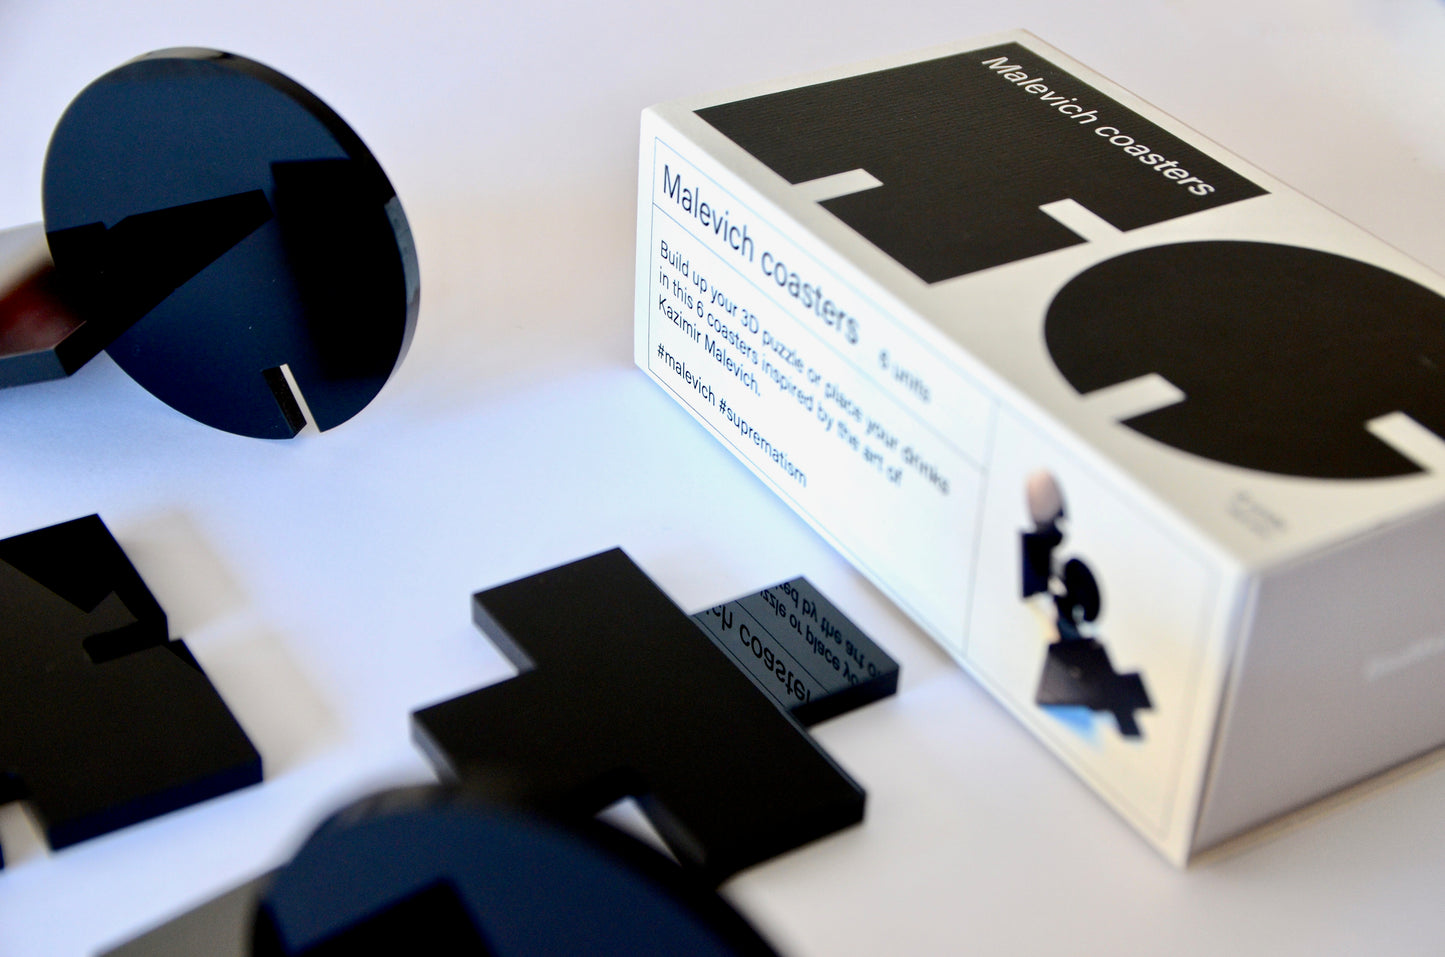 The 6 Malevich Coasters